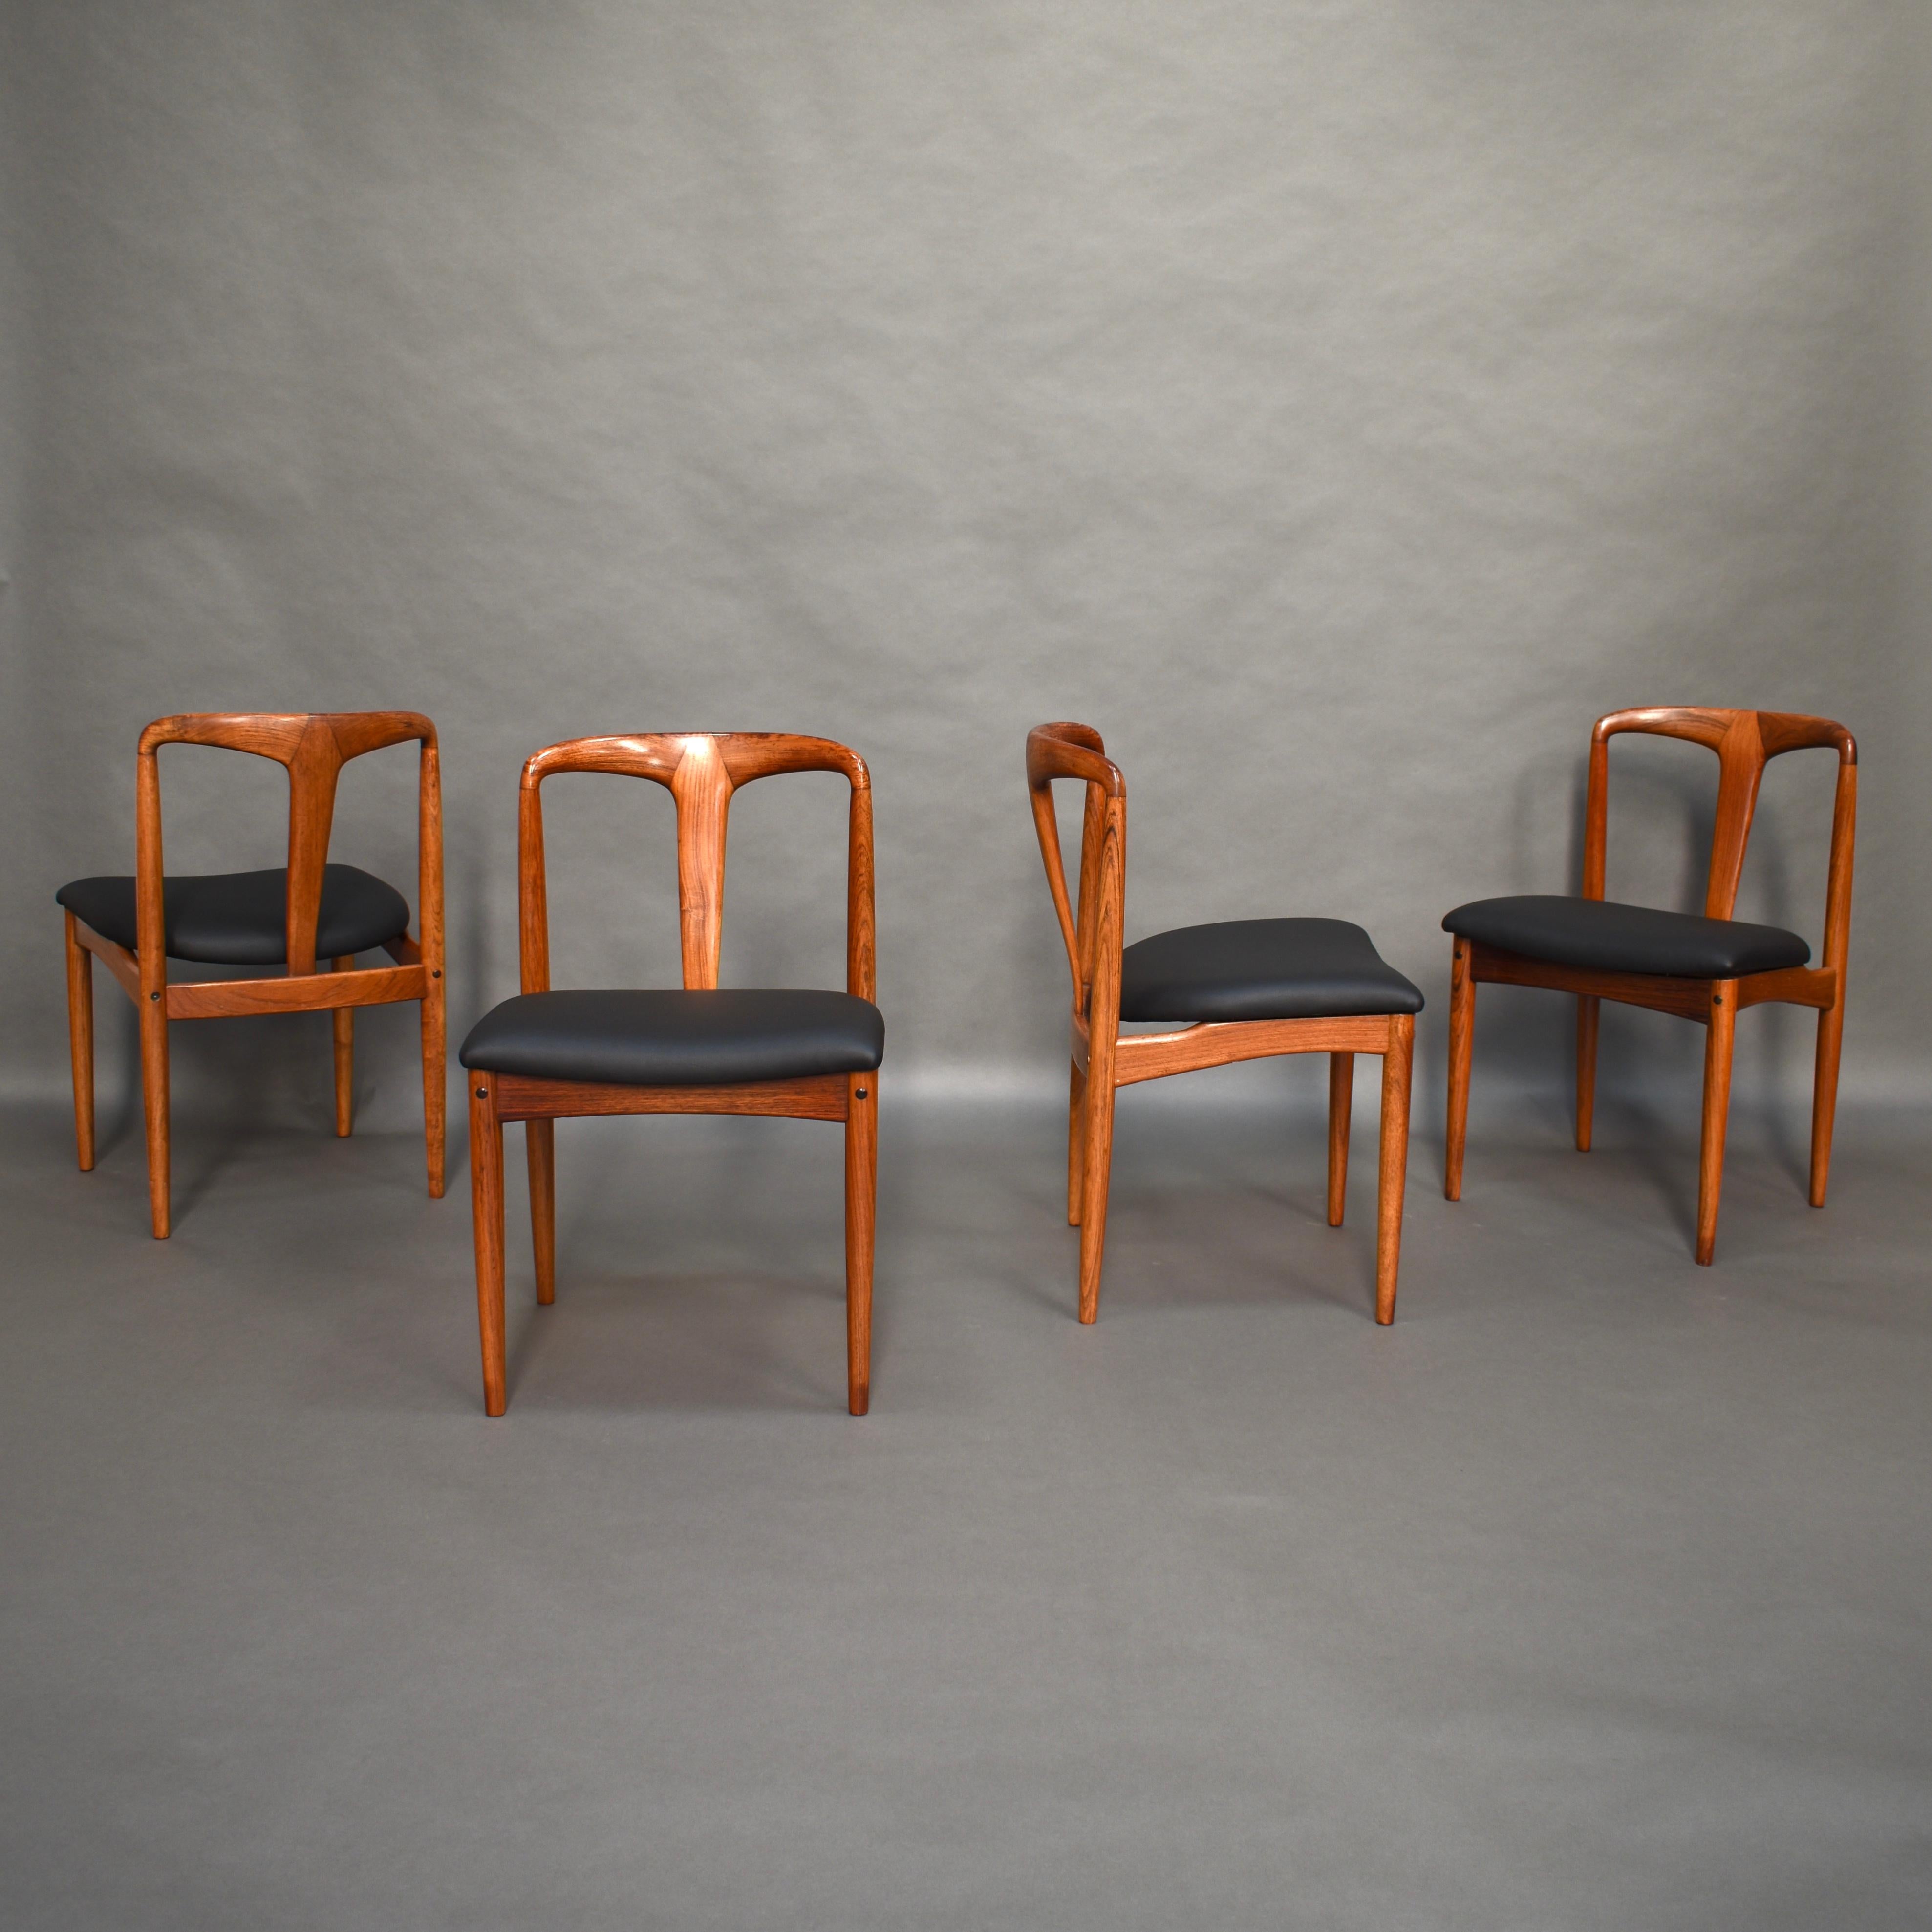 Mid-20th Century Scandinavian Johannes Andersen Chairs with New Upholstery, Denmark, 1960s